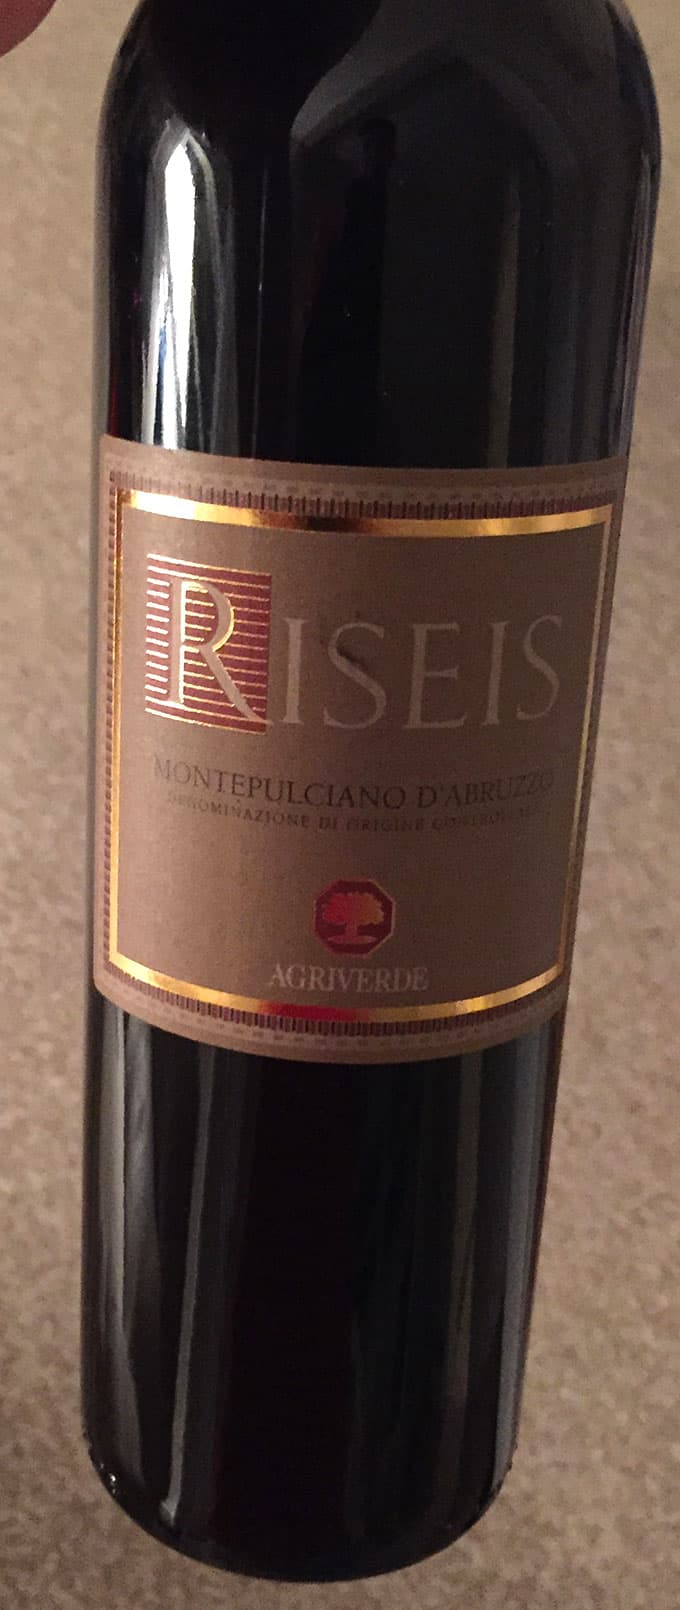 Riseis Montepulciano D'Abruzzo makes a good wine pairing for pizza or other simple Italian food. | cookingchatfood.com